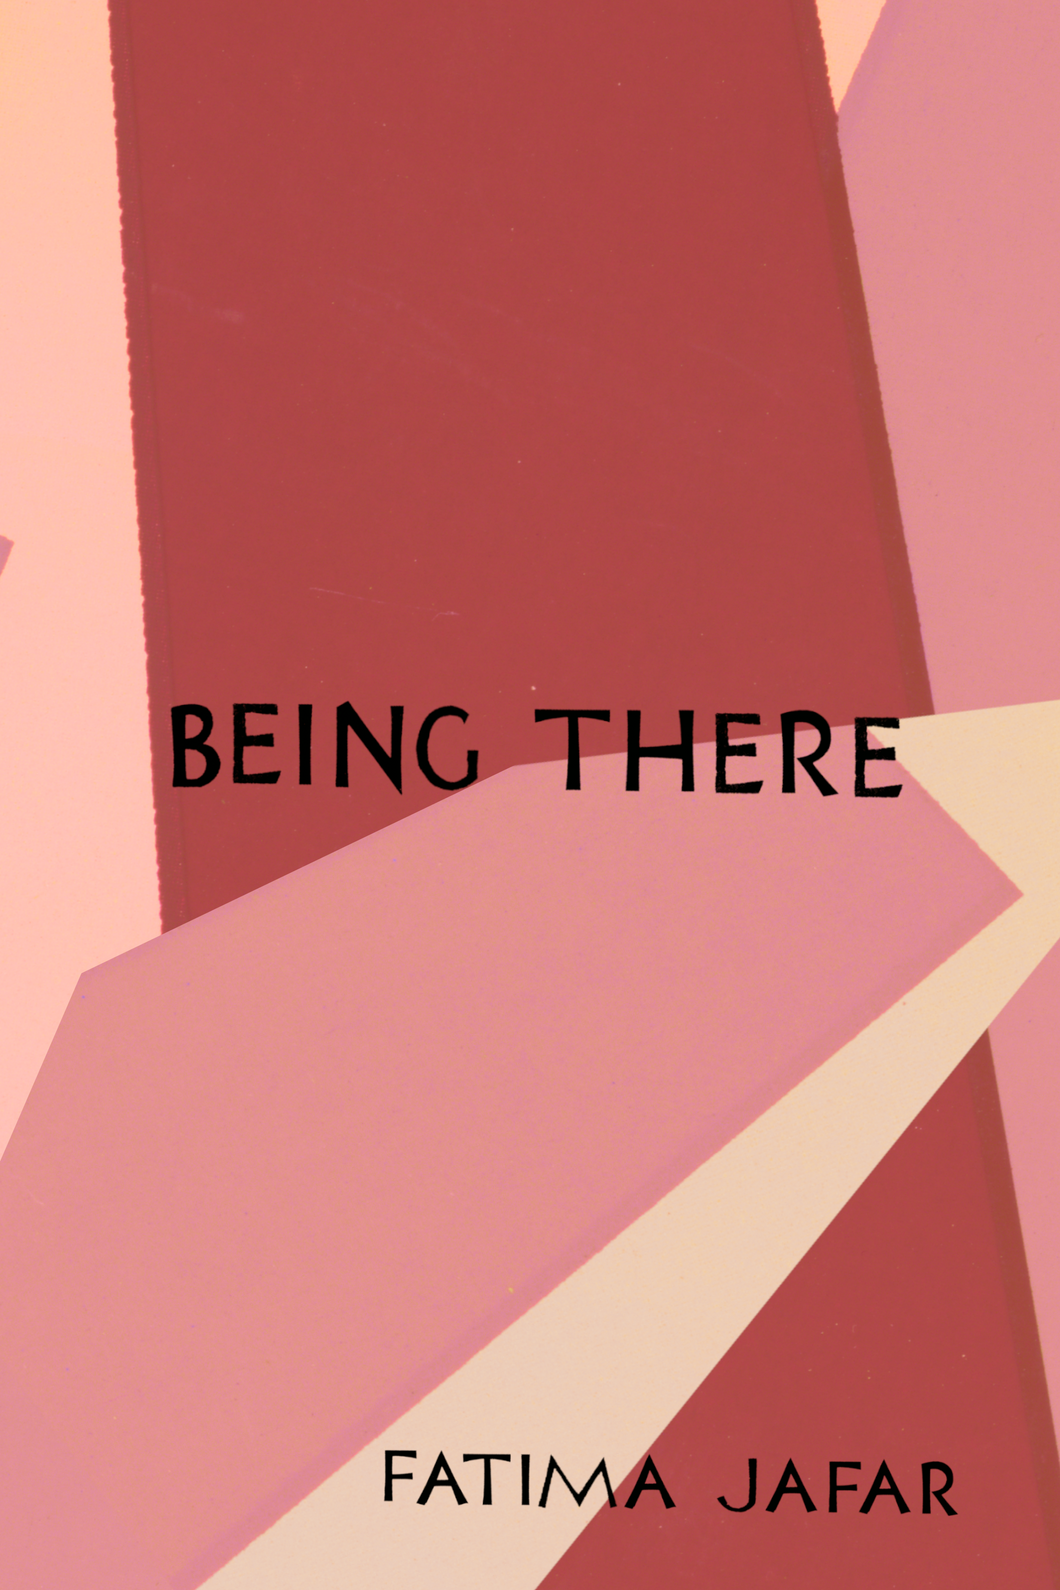 Being There, by Fatima Jafar-Print Books-Bottlecap Press